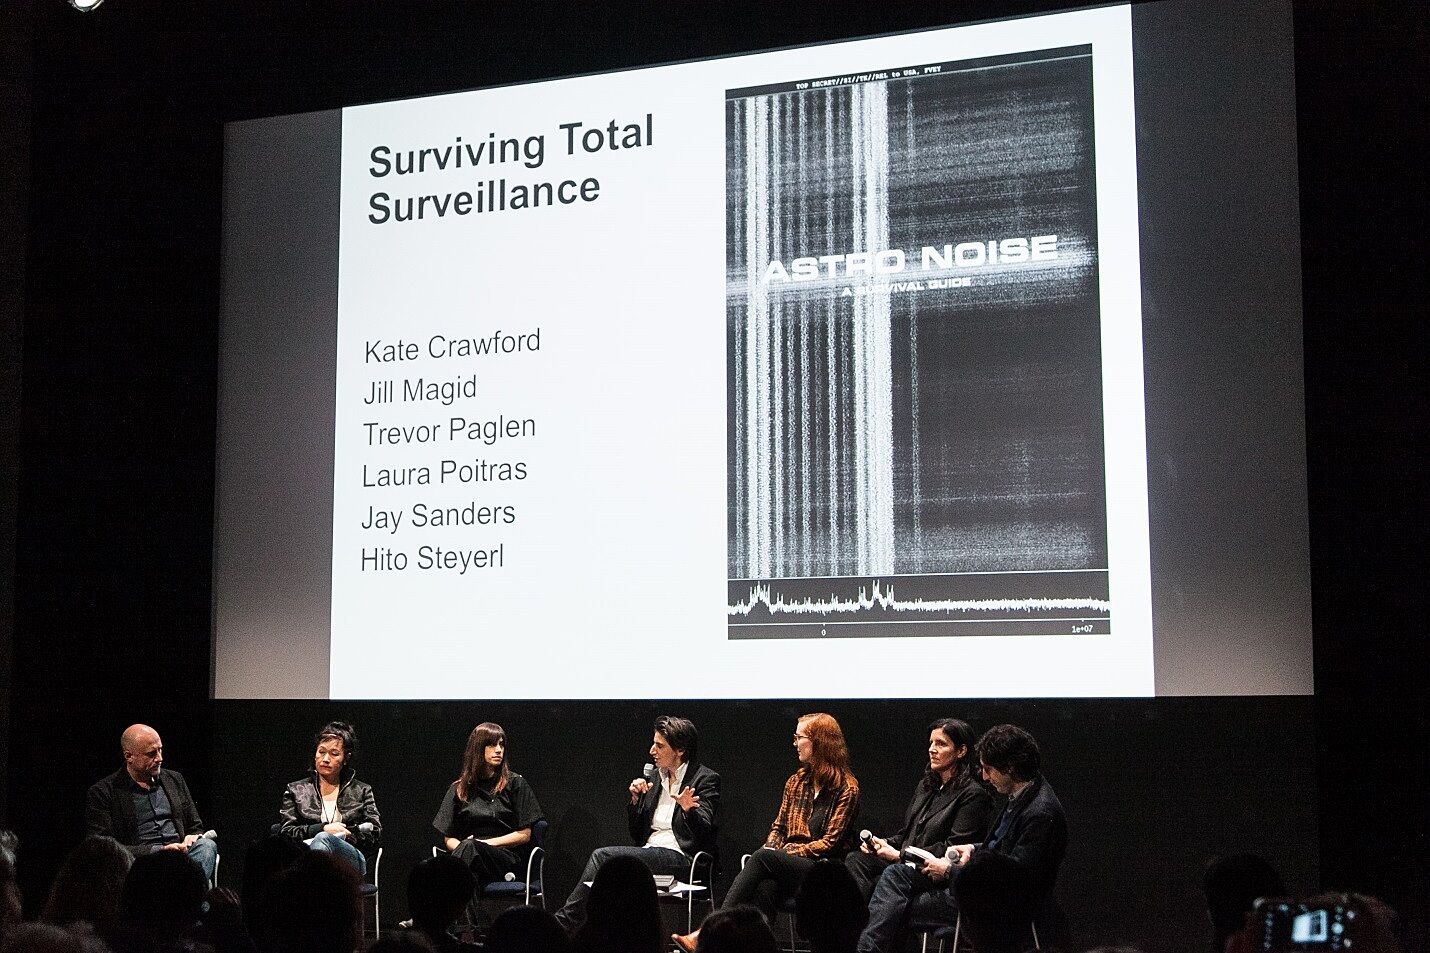 A panel discussion on surveillance in society